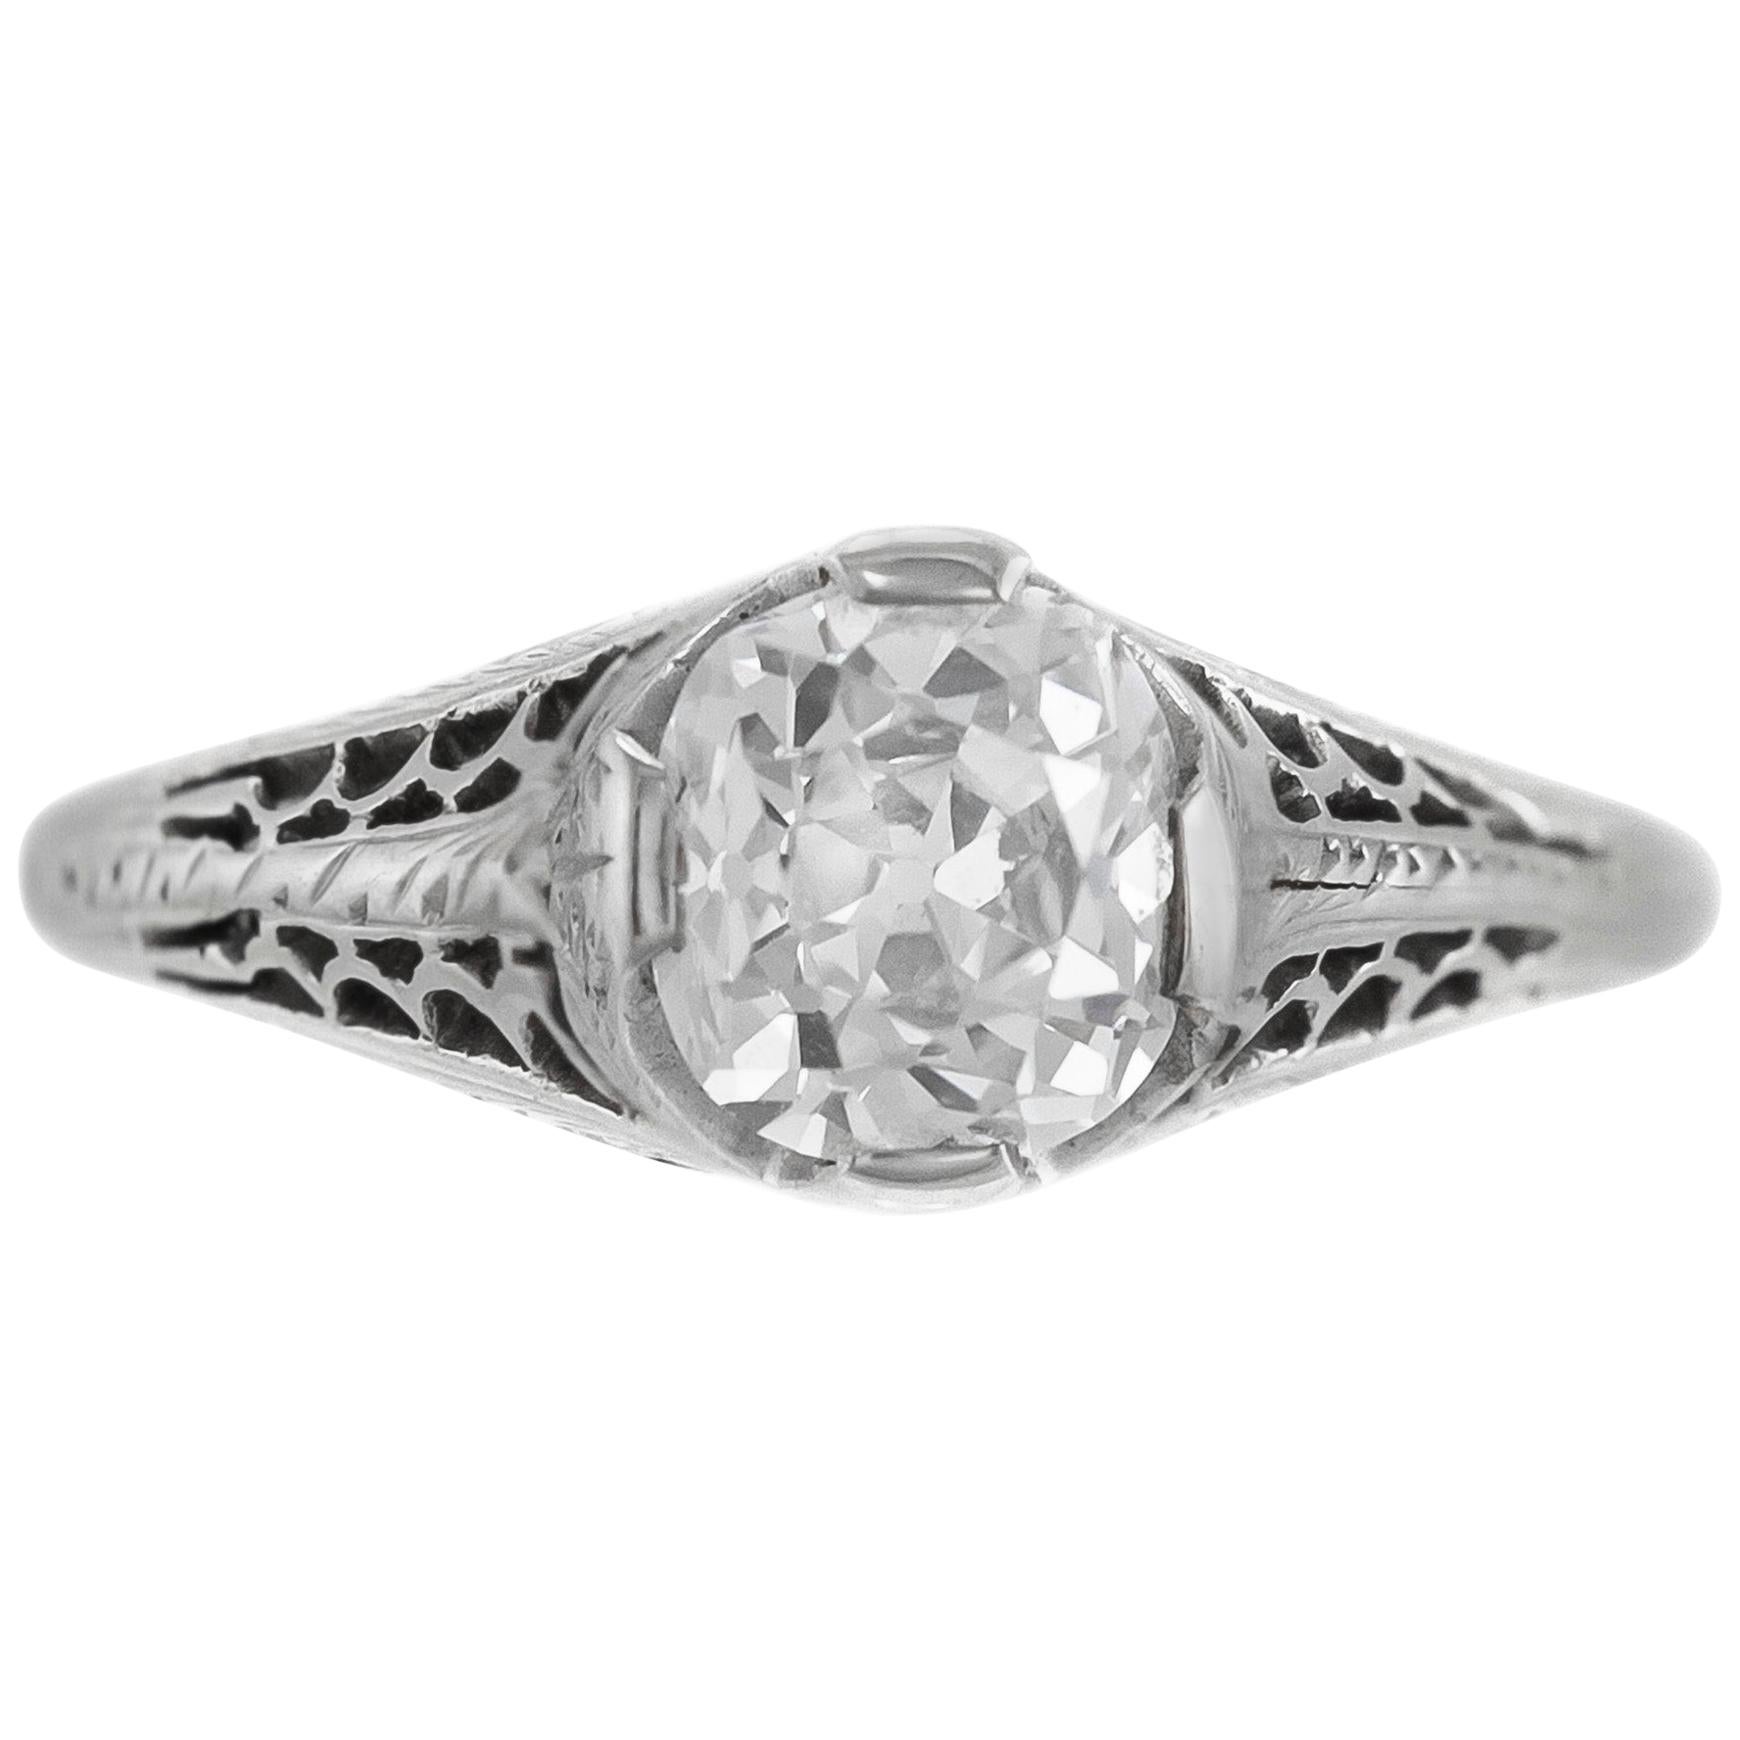 1920s-1930s Beautiful Filigree with One Round Diamond Engagement Ring For Sale